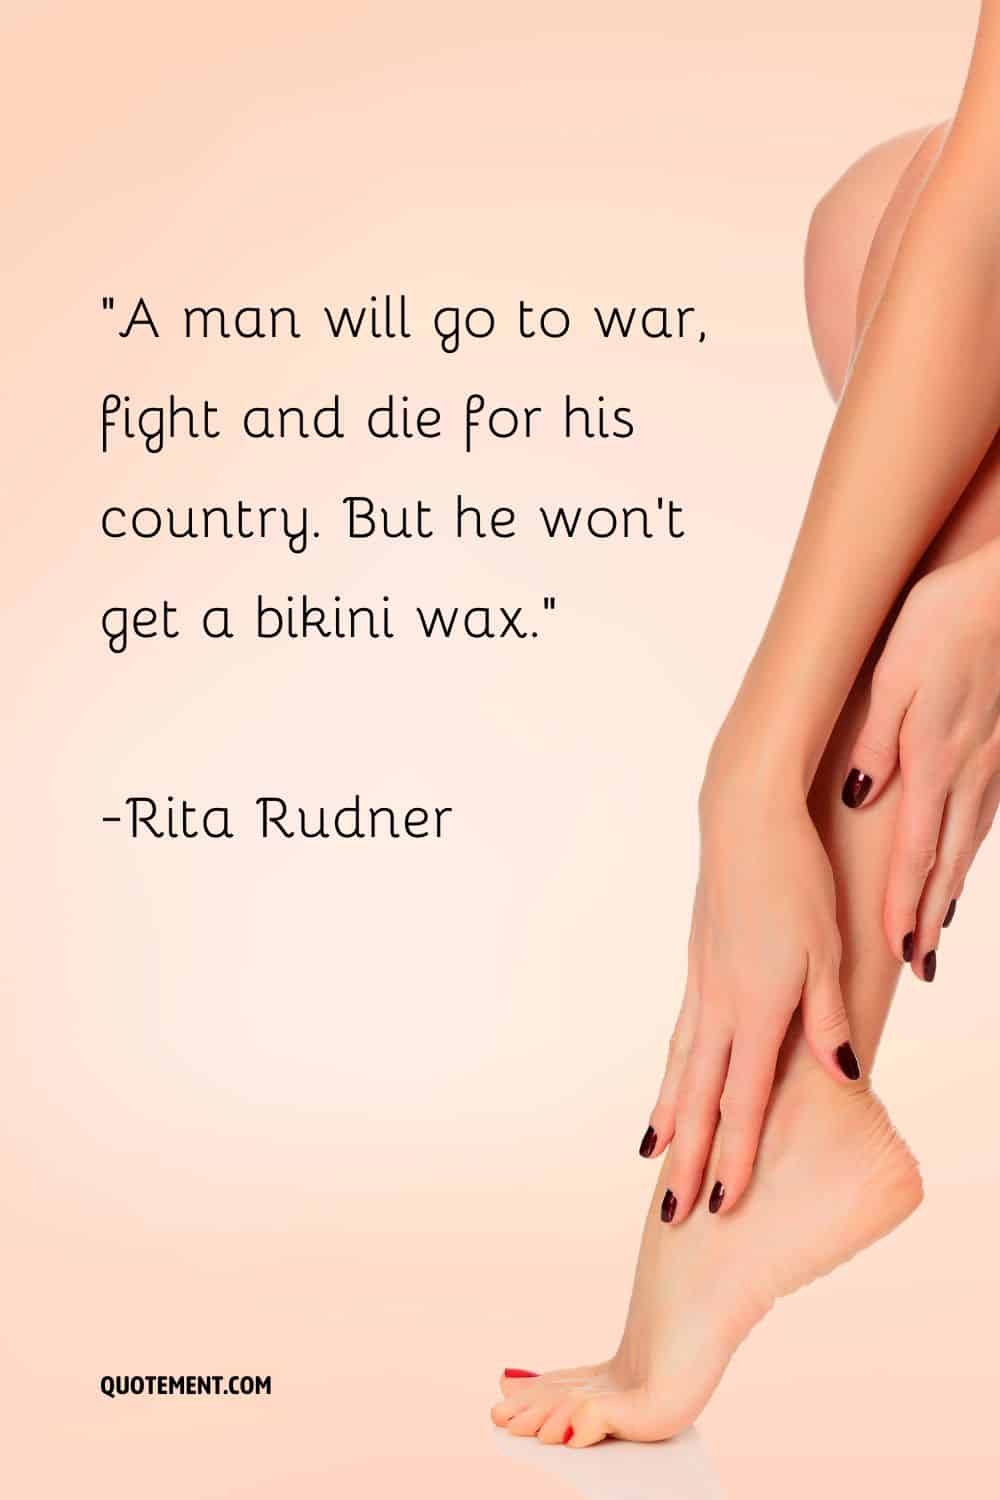 A man will go to war, fight and die for his country. But he won’t get a bikini wax